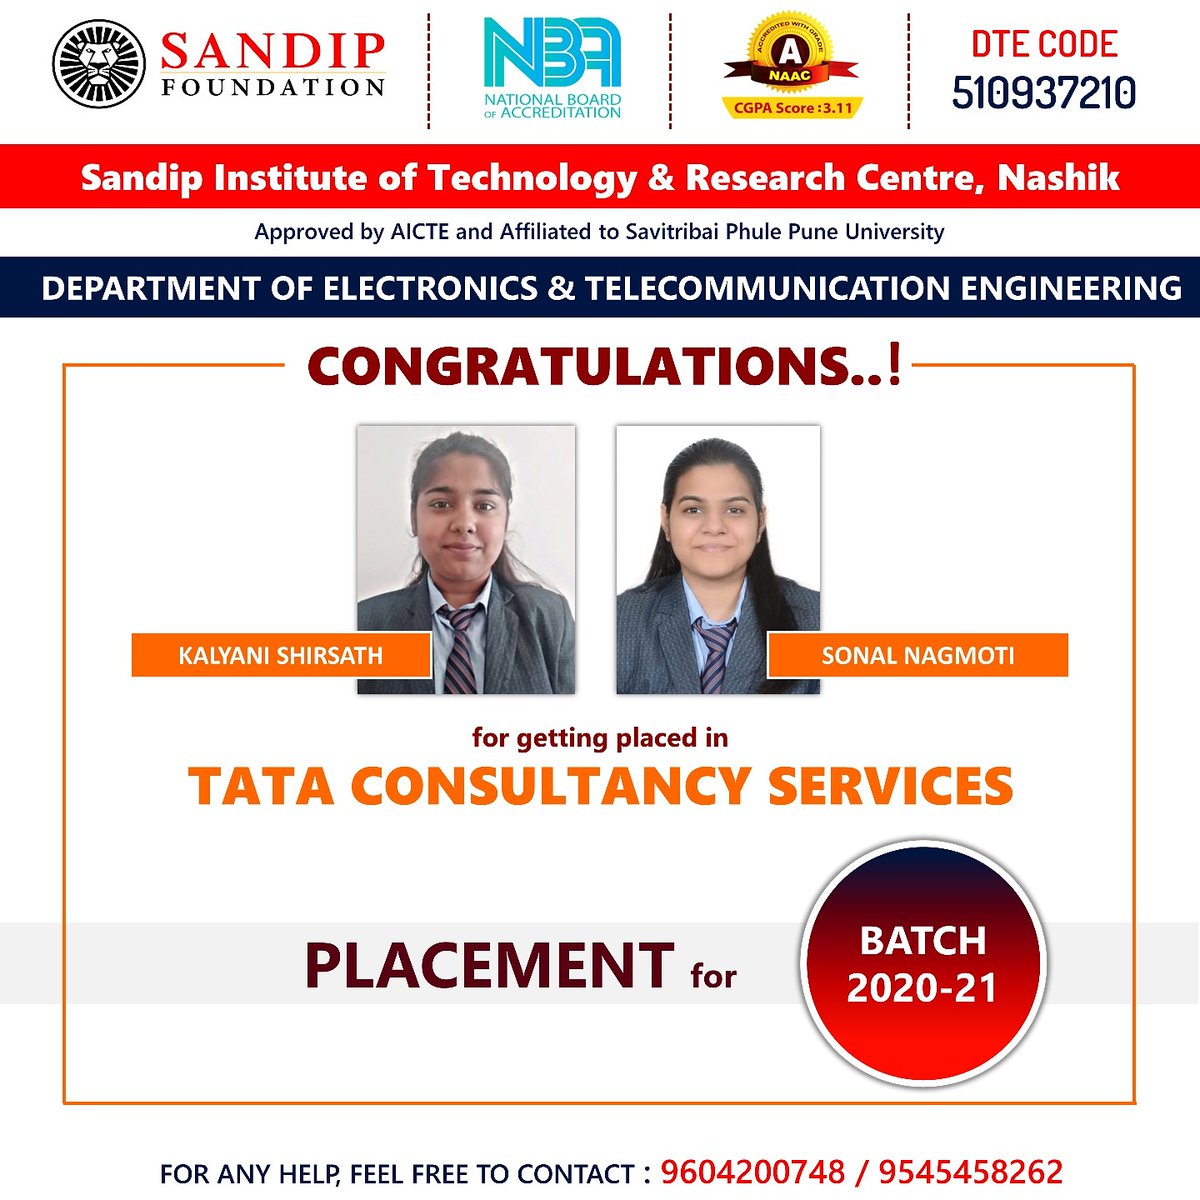 Heartiest Congratulations for getting placed in Tata Consultancy Services.. 🎉

#sitrcentc #SandipFoundation #weareproudofyou #placement2021